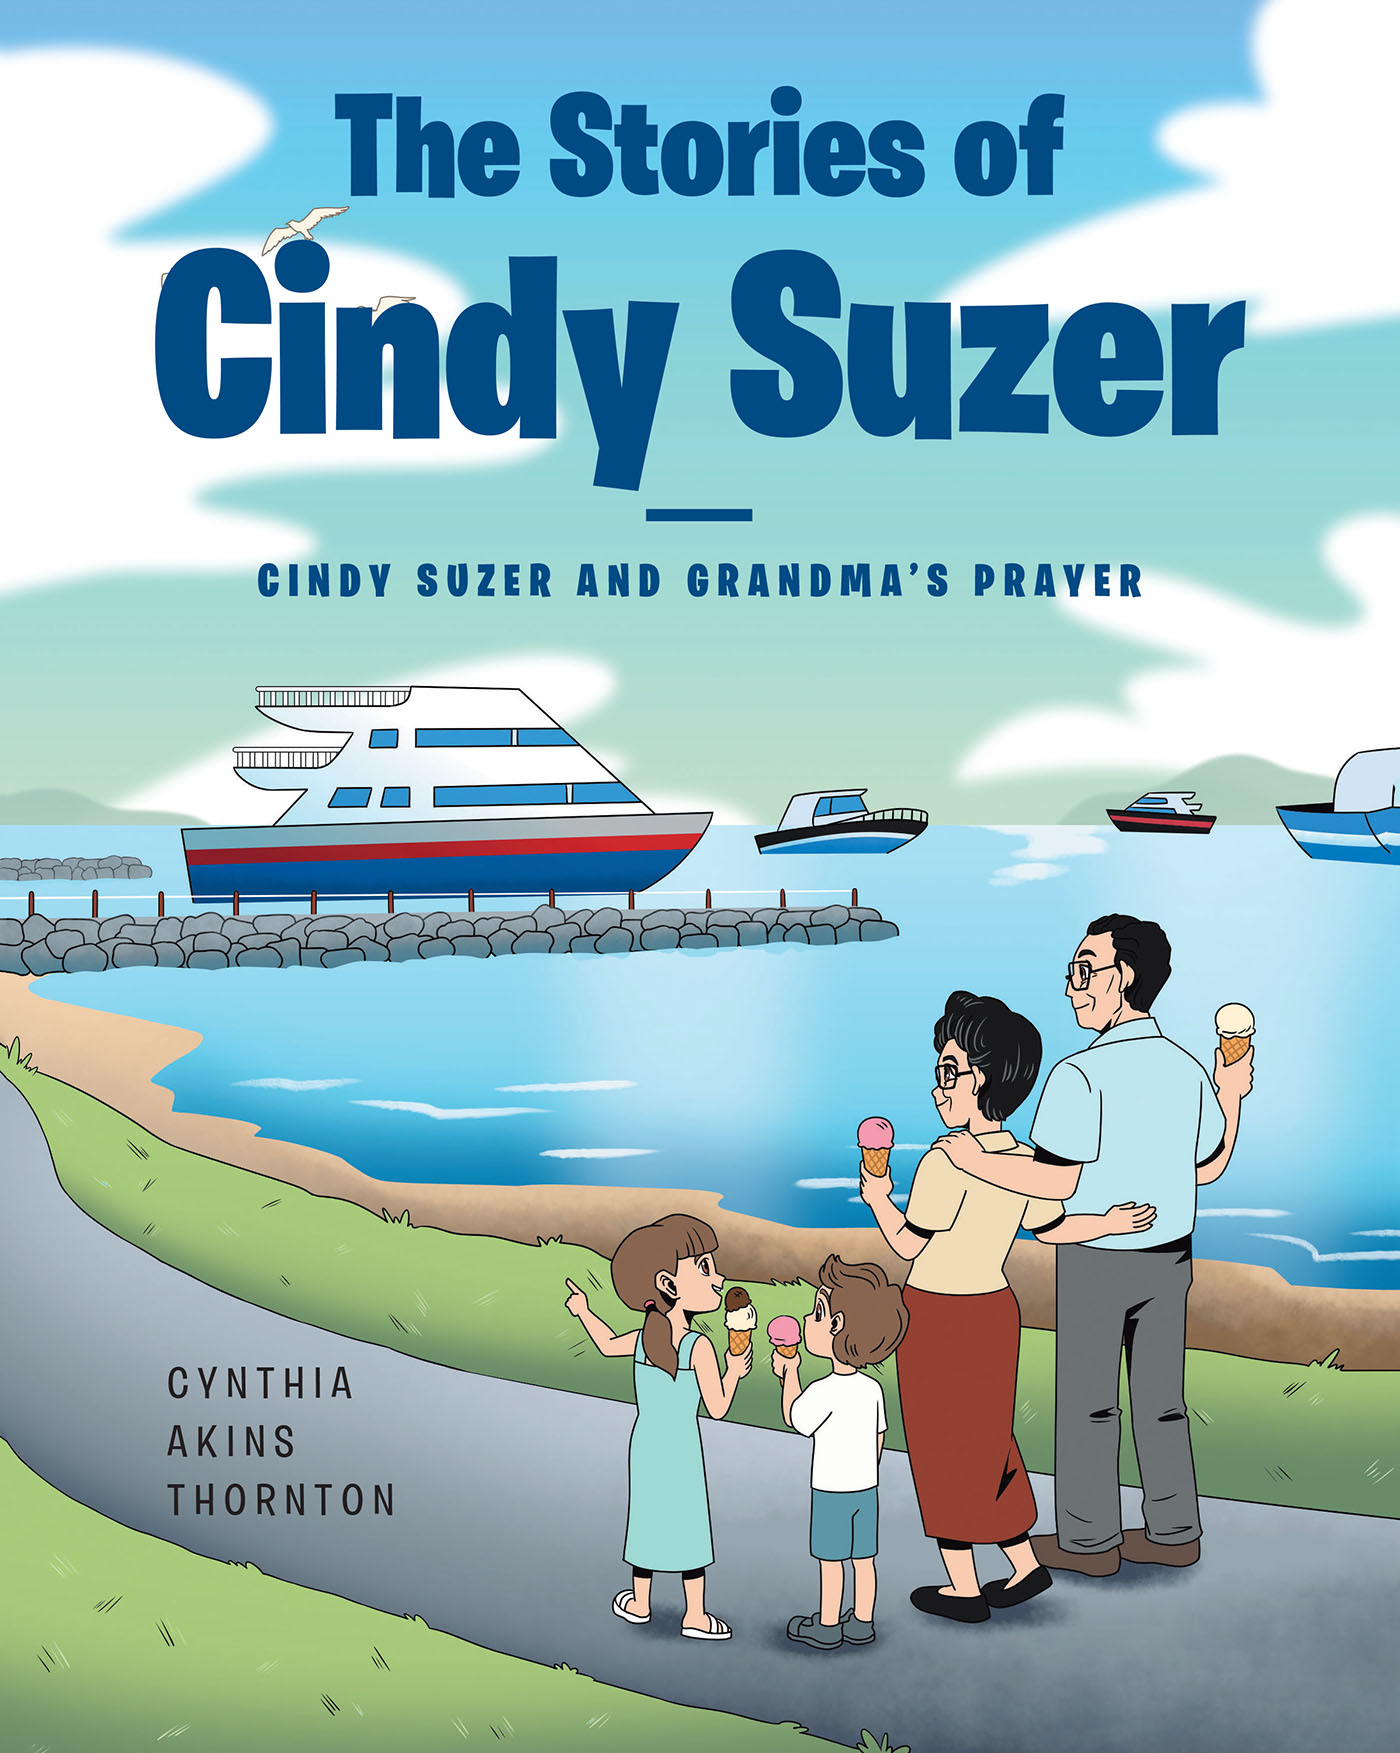 Author Cynthia Akins Thornton’s New Book, "The Stories of Cindy Suzer: Cindy Suzer and Grandma’s Prayer," is a Children’s Story with a Meaningful Lesson